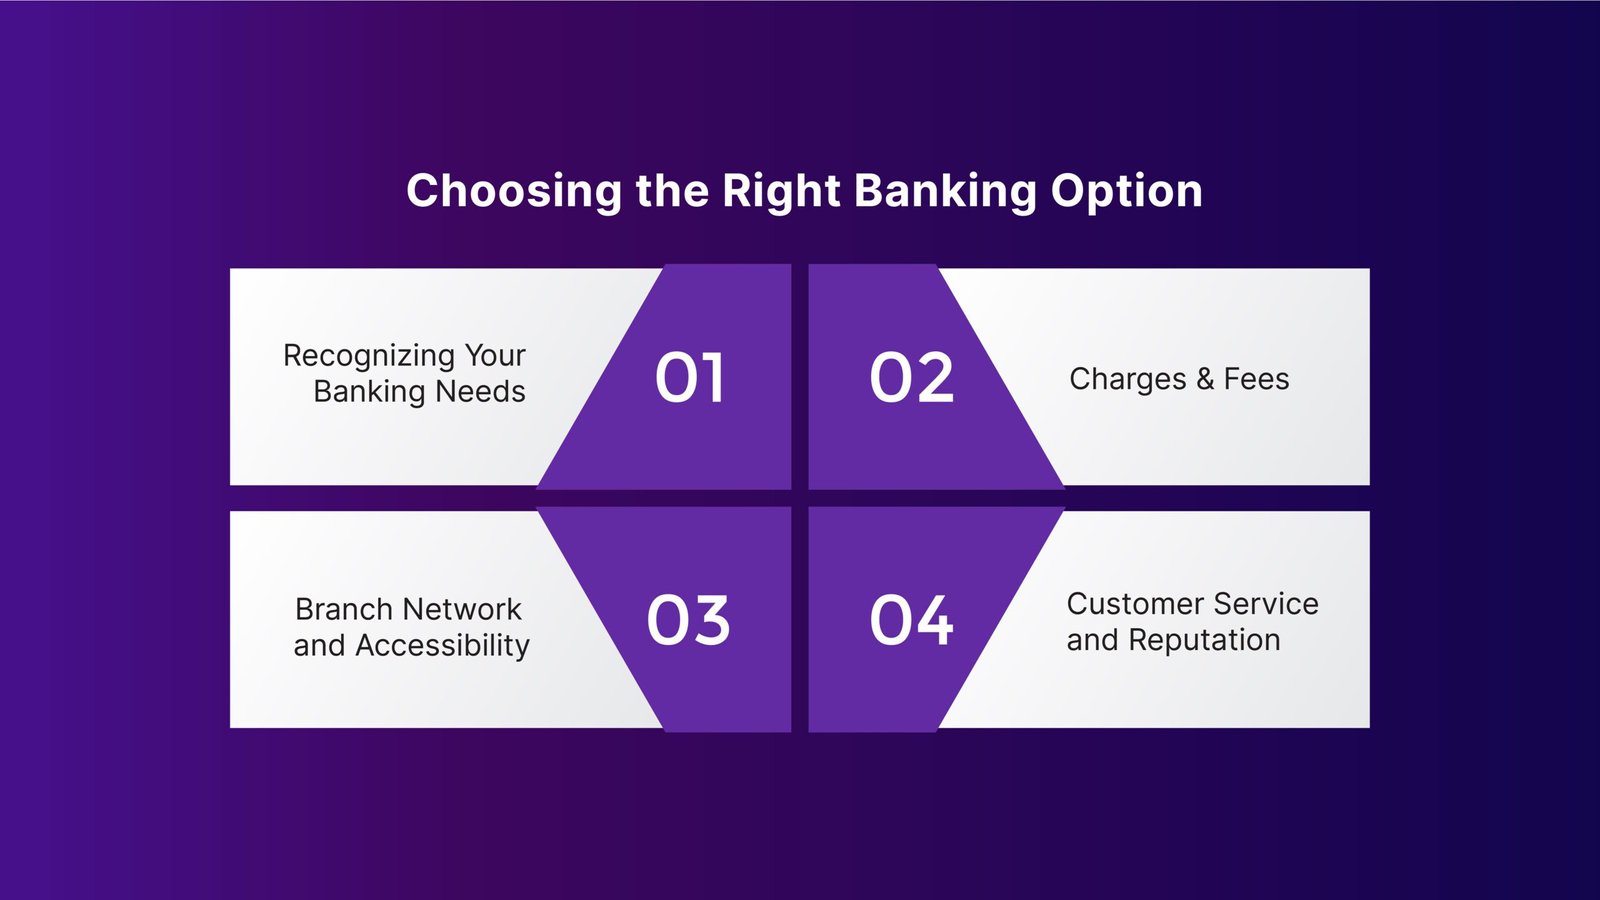 Choosing the Right Banking Option